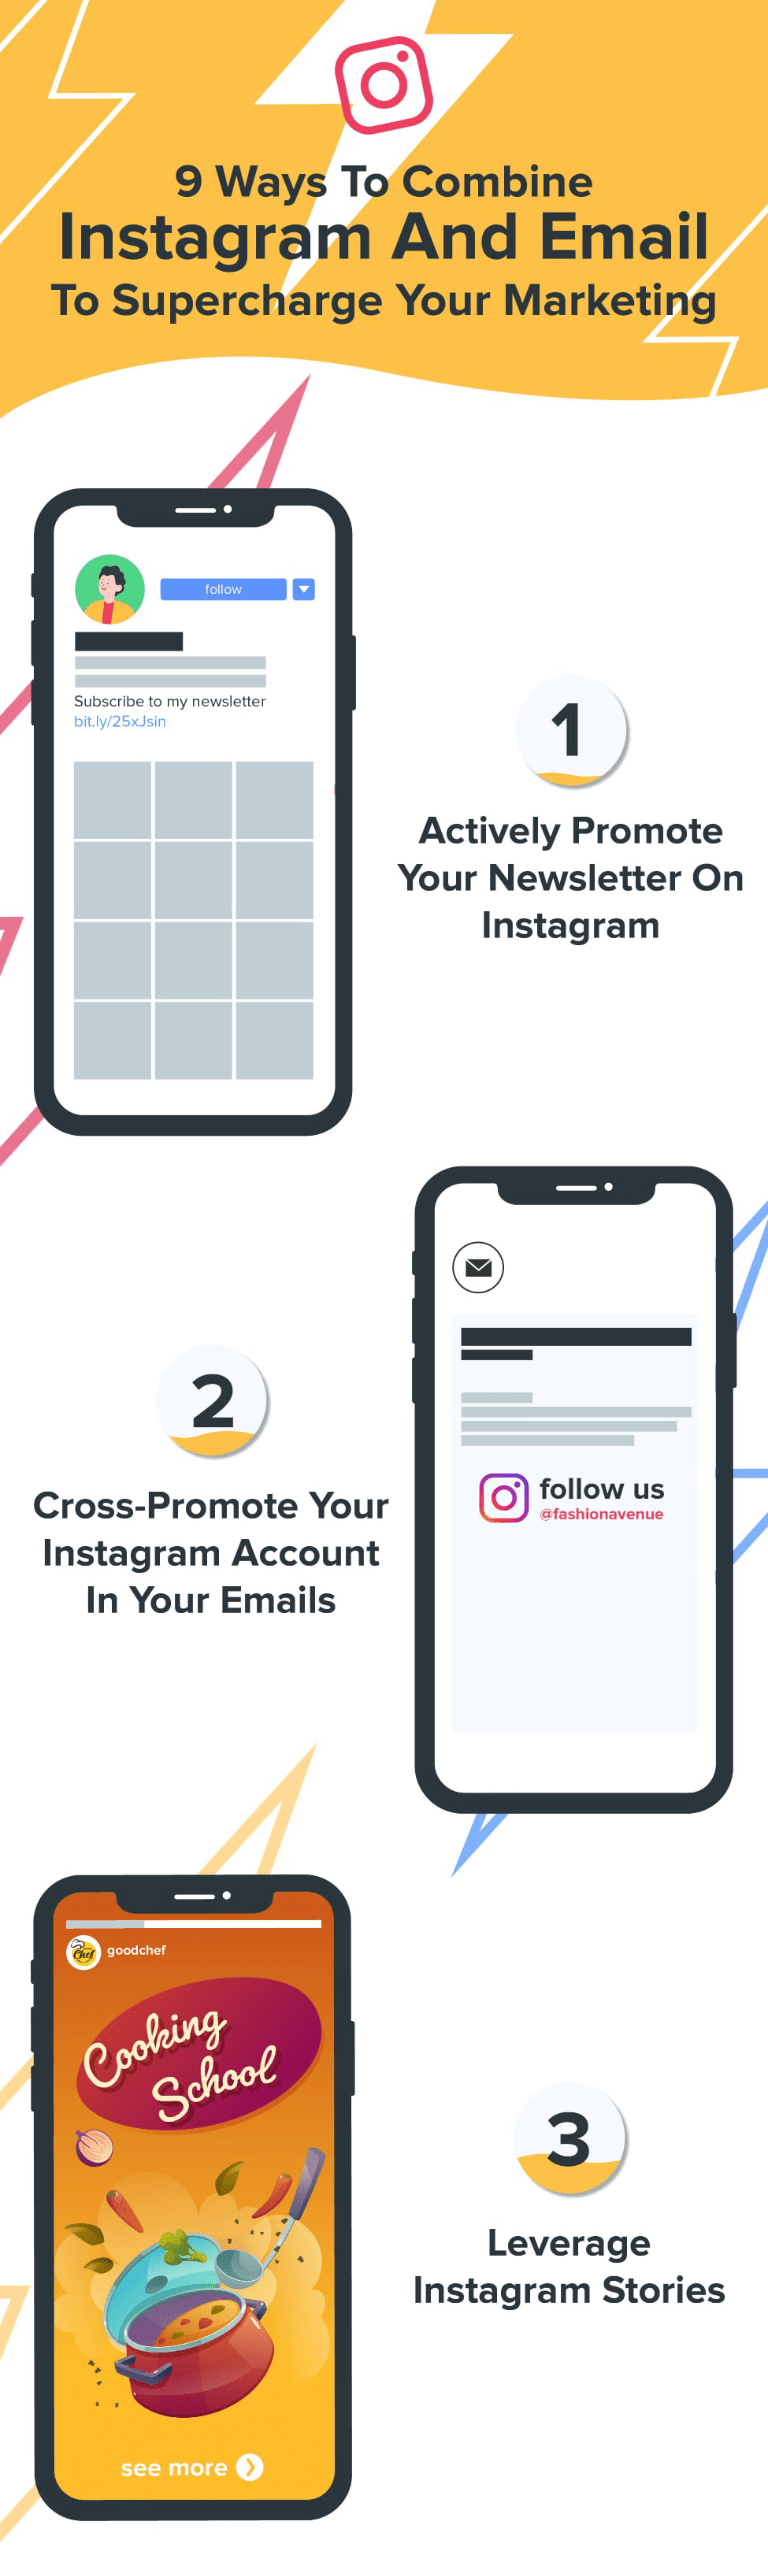 9 Ways To Combine Instagram And Email To Supercharge Your Marketing